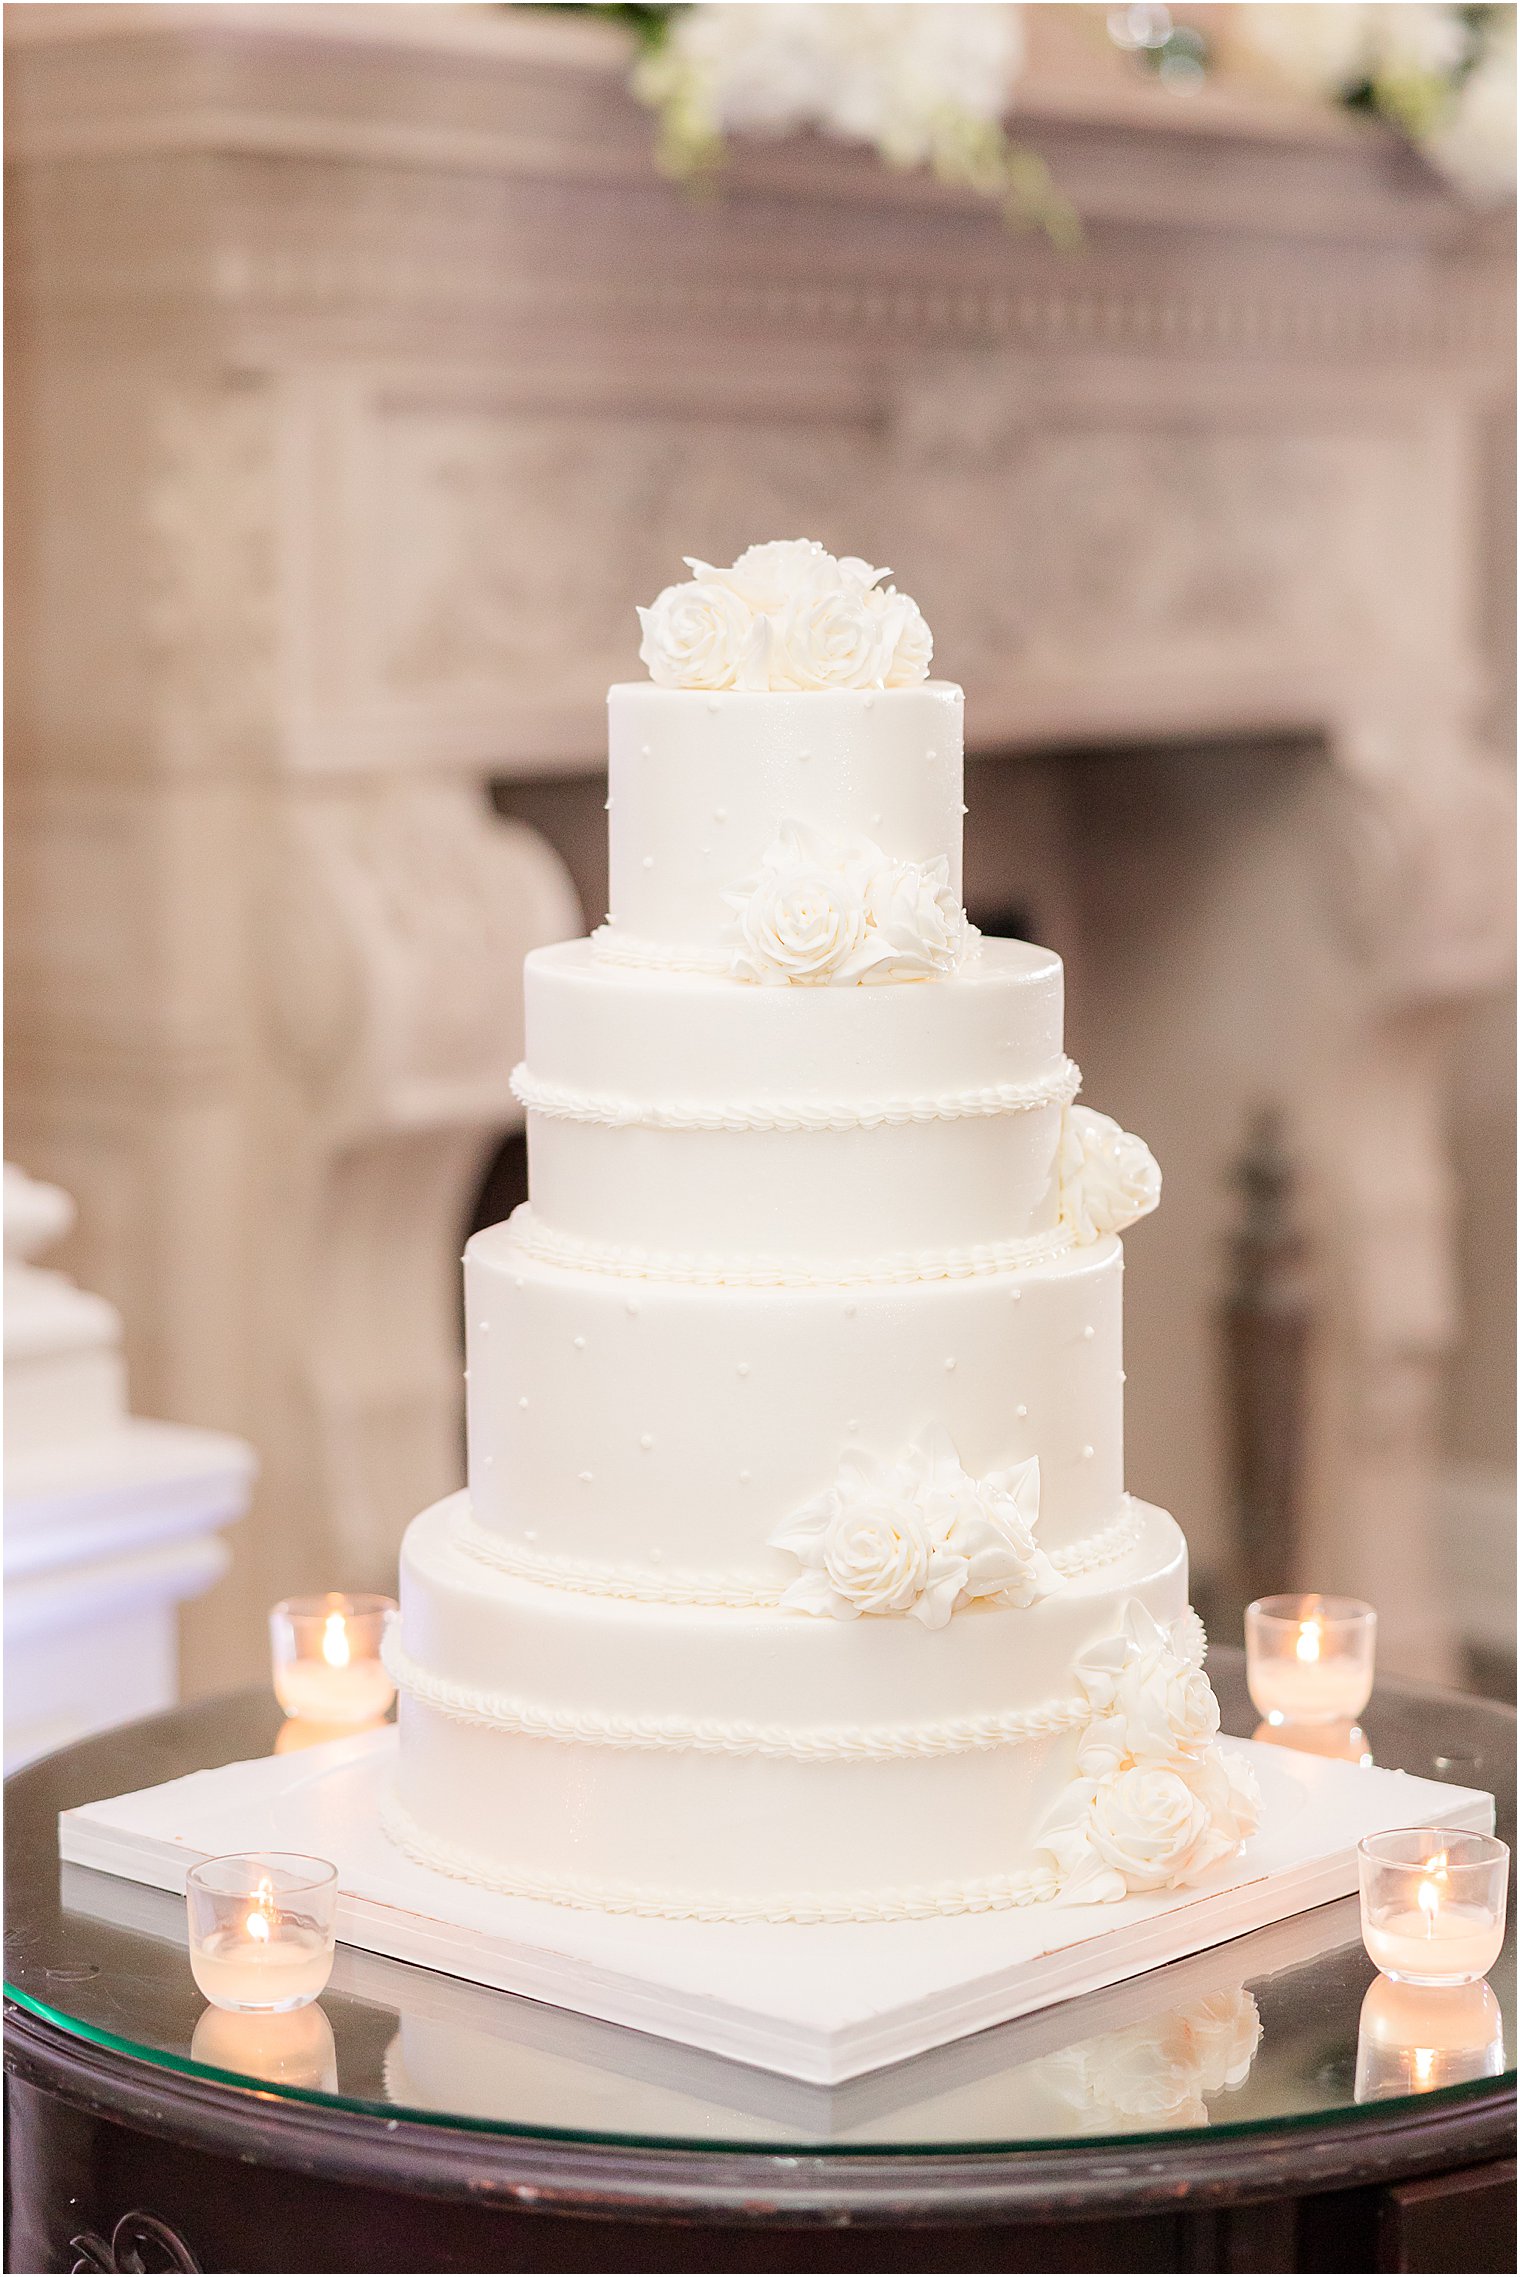 tiered wedding cake in all-white icing with flowers 